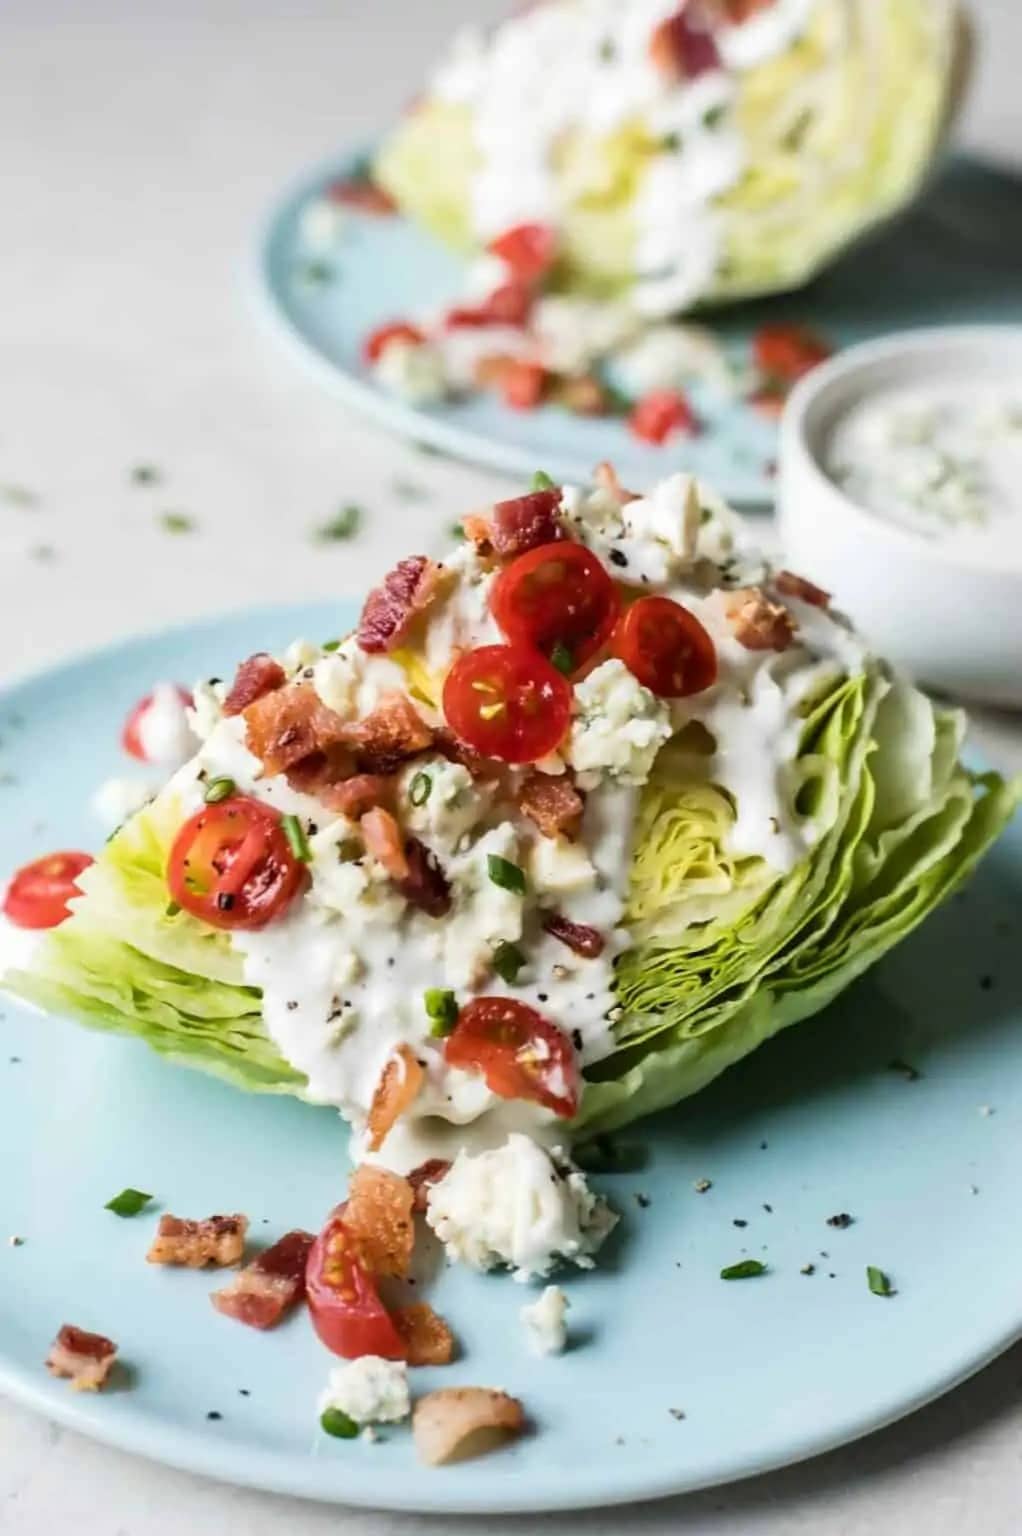 Wedge salad made with a slice of cabbage topped with salty bacon, sweet tomatoes and a rich blue cheese dressing.